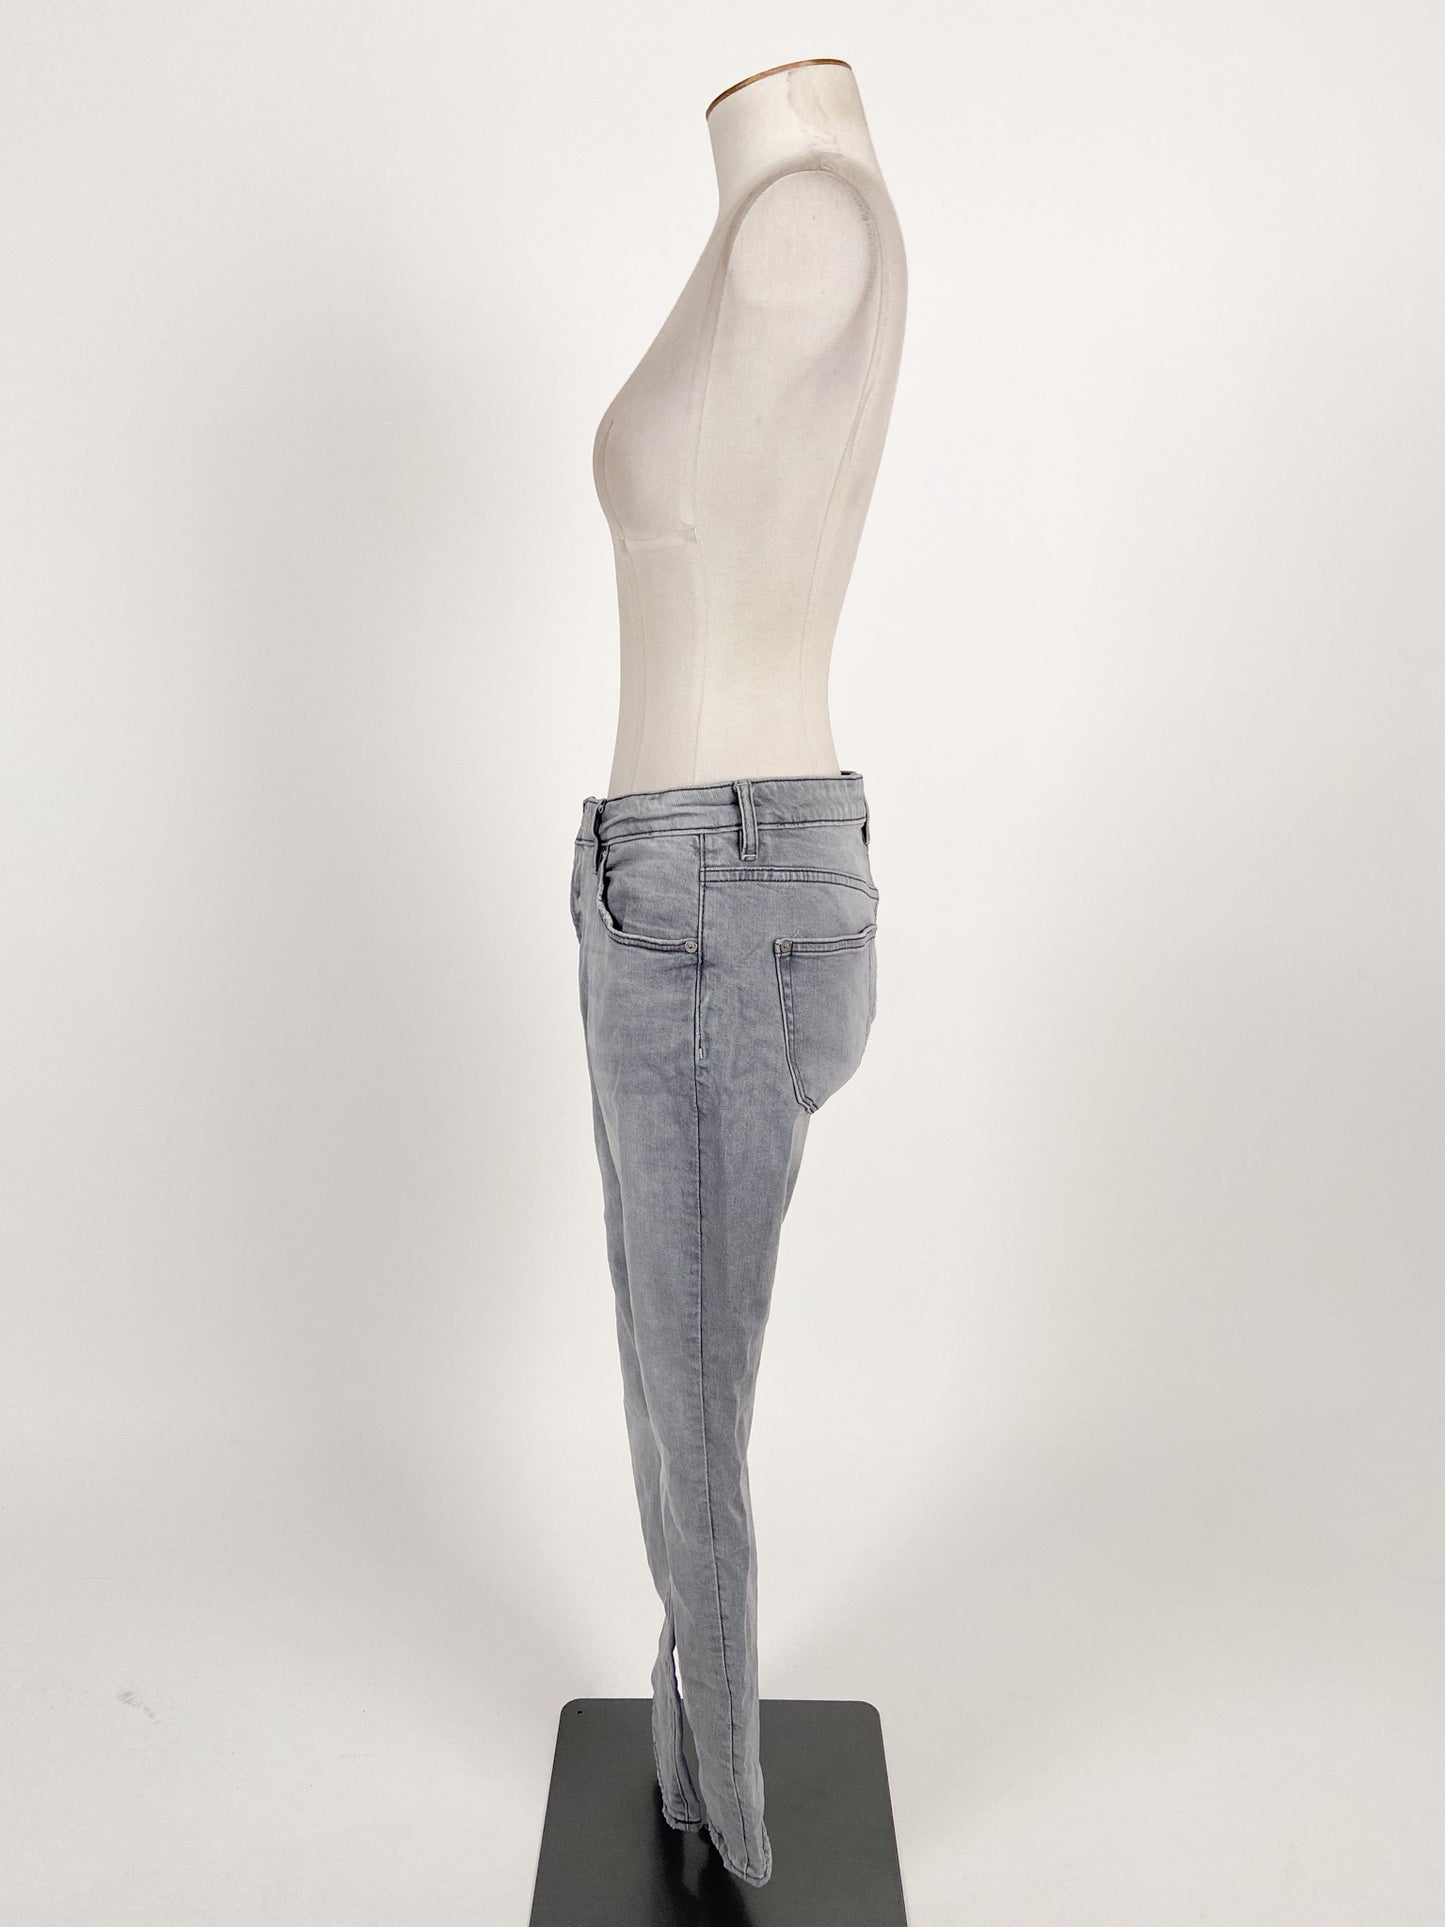 Just Jeans | Grey Casual Jeans | Size 10